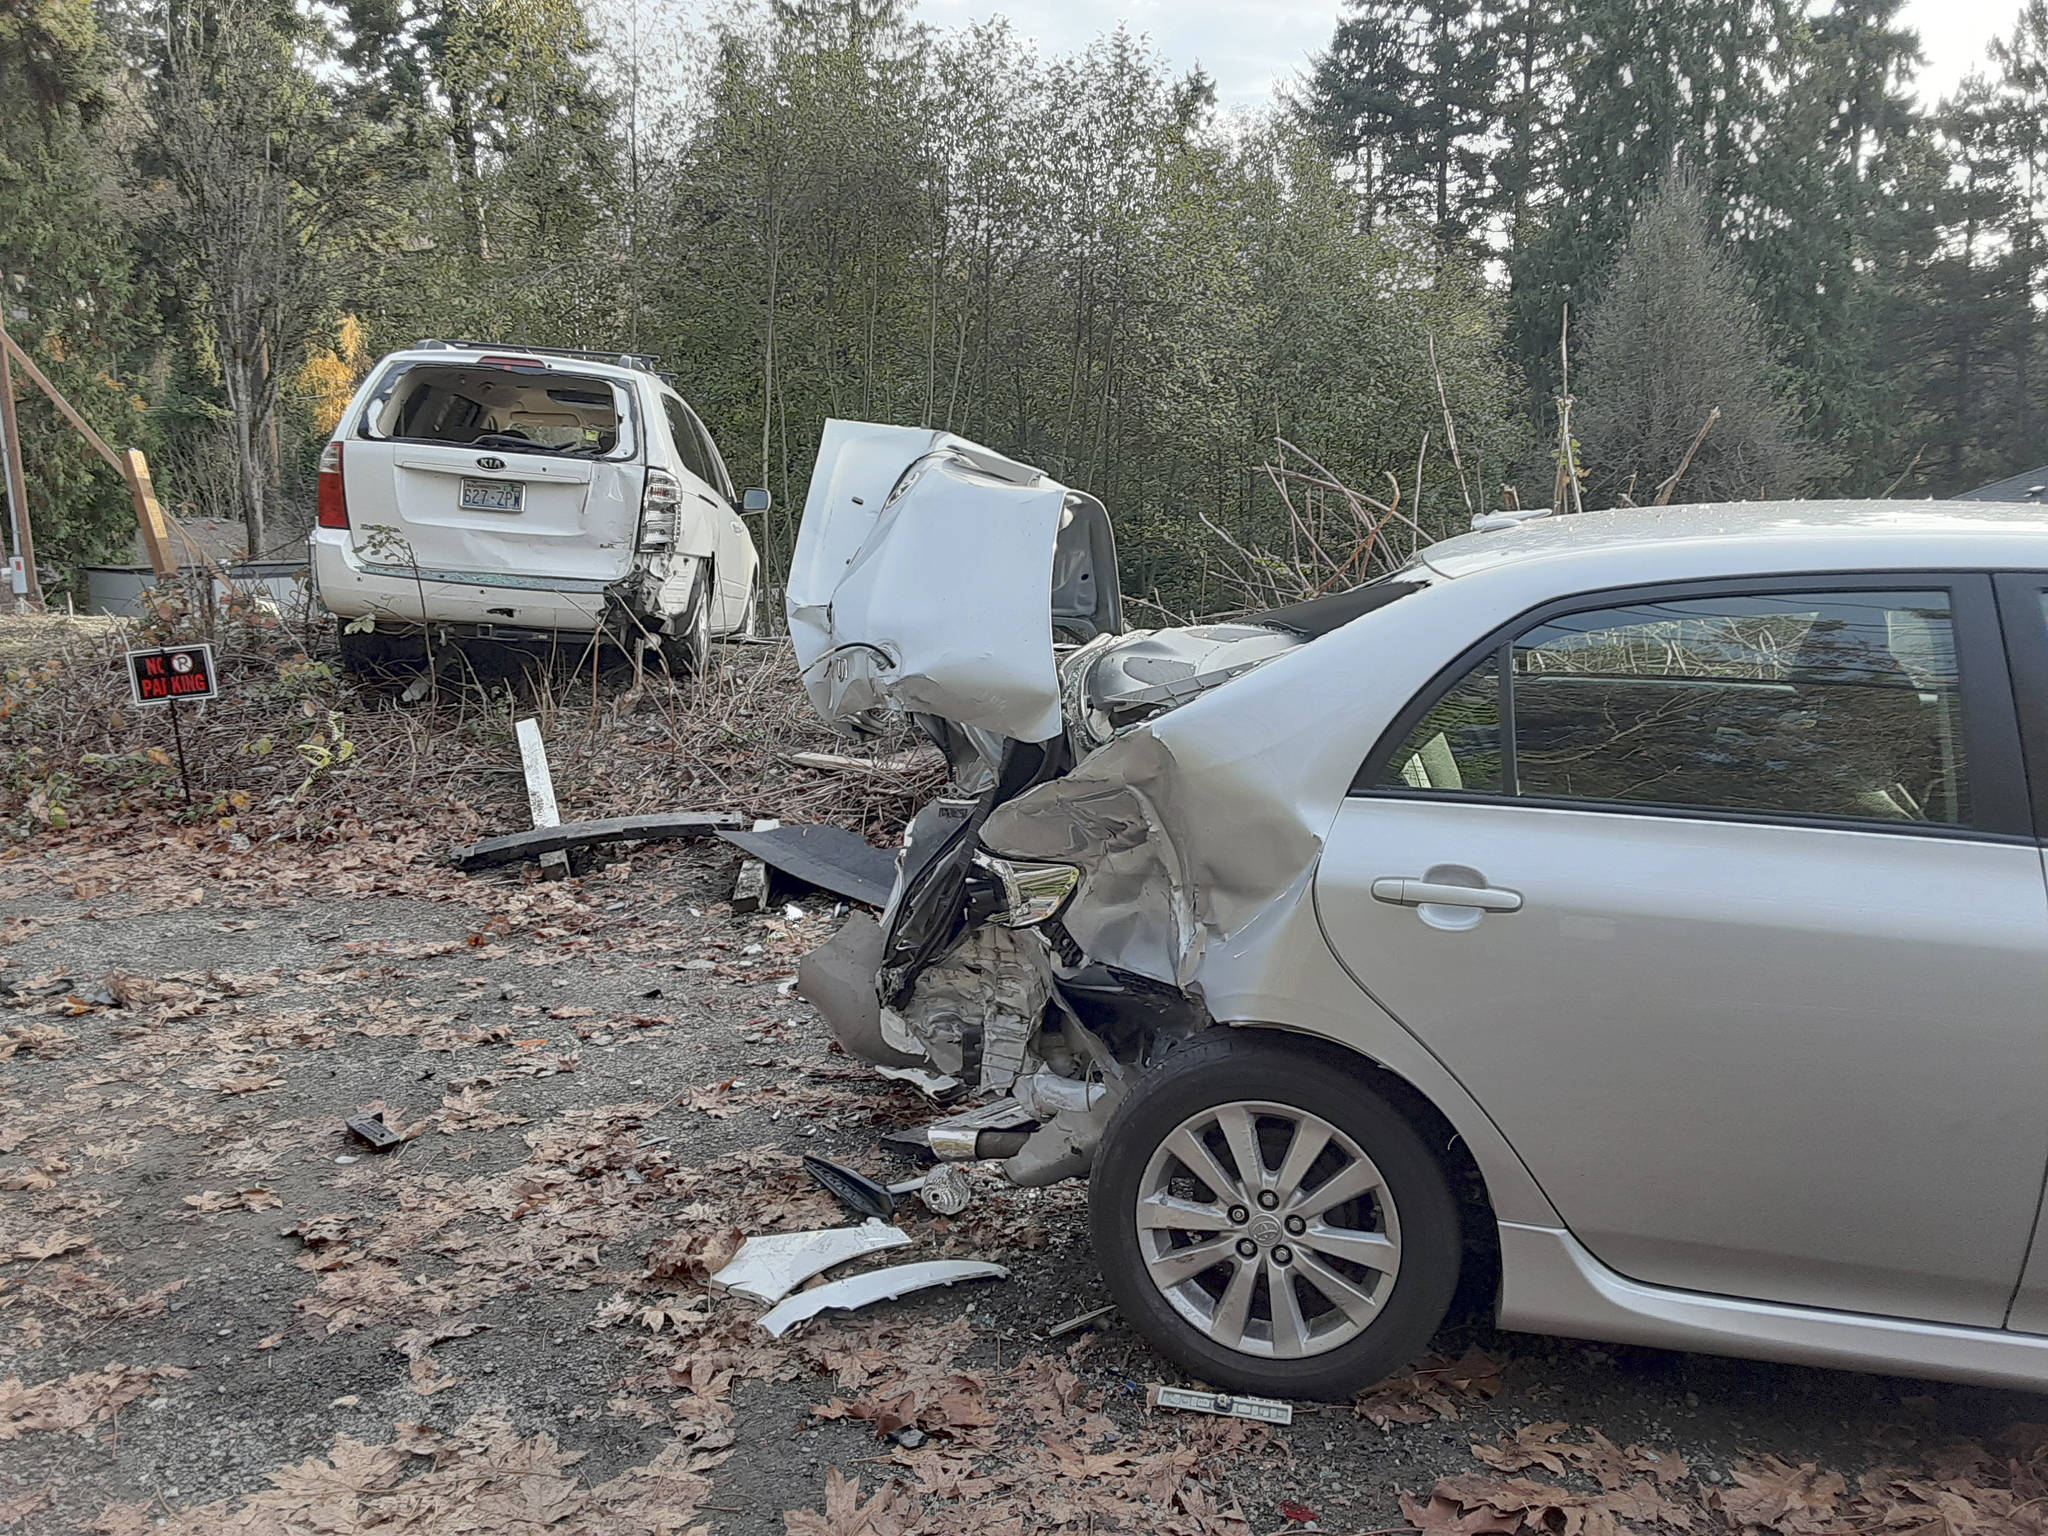 The photo shows two of the cars damaged during a car collision on Nov. 11 on West Mercer Way. Photo courtesy of Peter Dornay